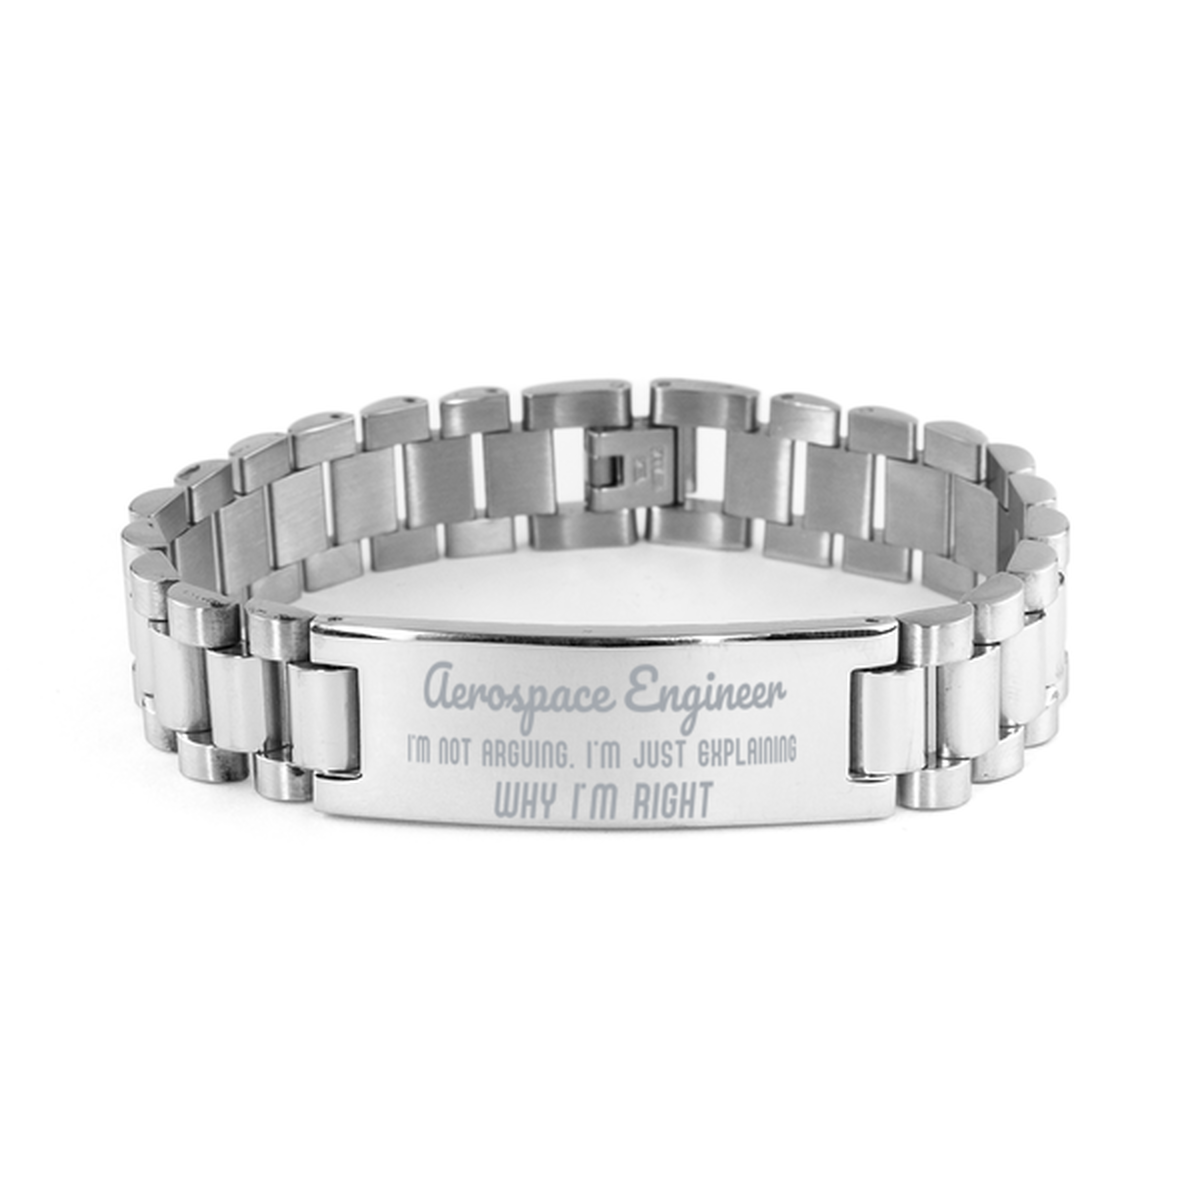 Aerospace Engineer I'm not Arguing. I'm Just Explaining Why I'm RIGHT Ladder Stainless Steel Bracelet, Graduation Birthday Christmas Aerospace Engineer Gifts For Aerospace Engineer Funny Saying Quote Present for Men Women Coworker